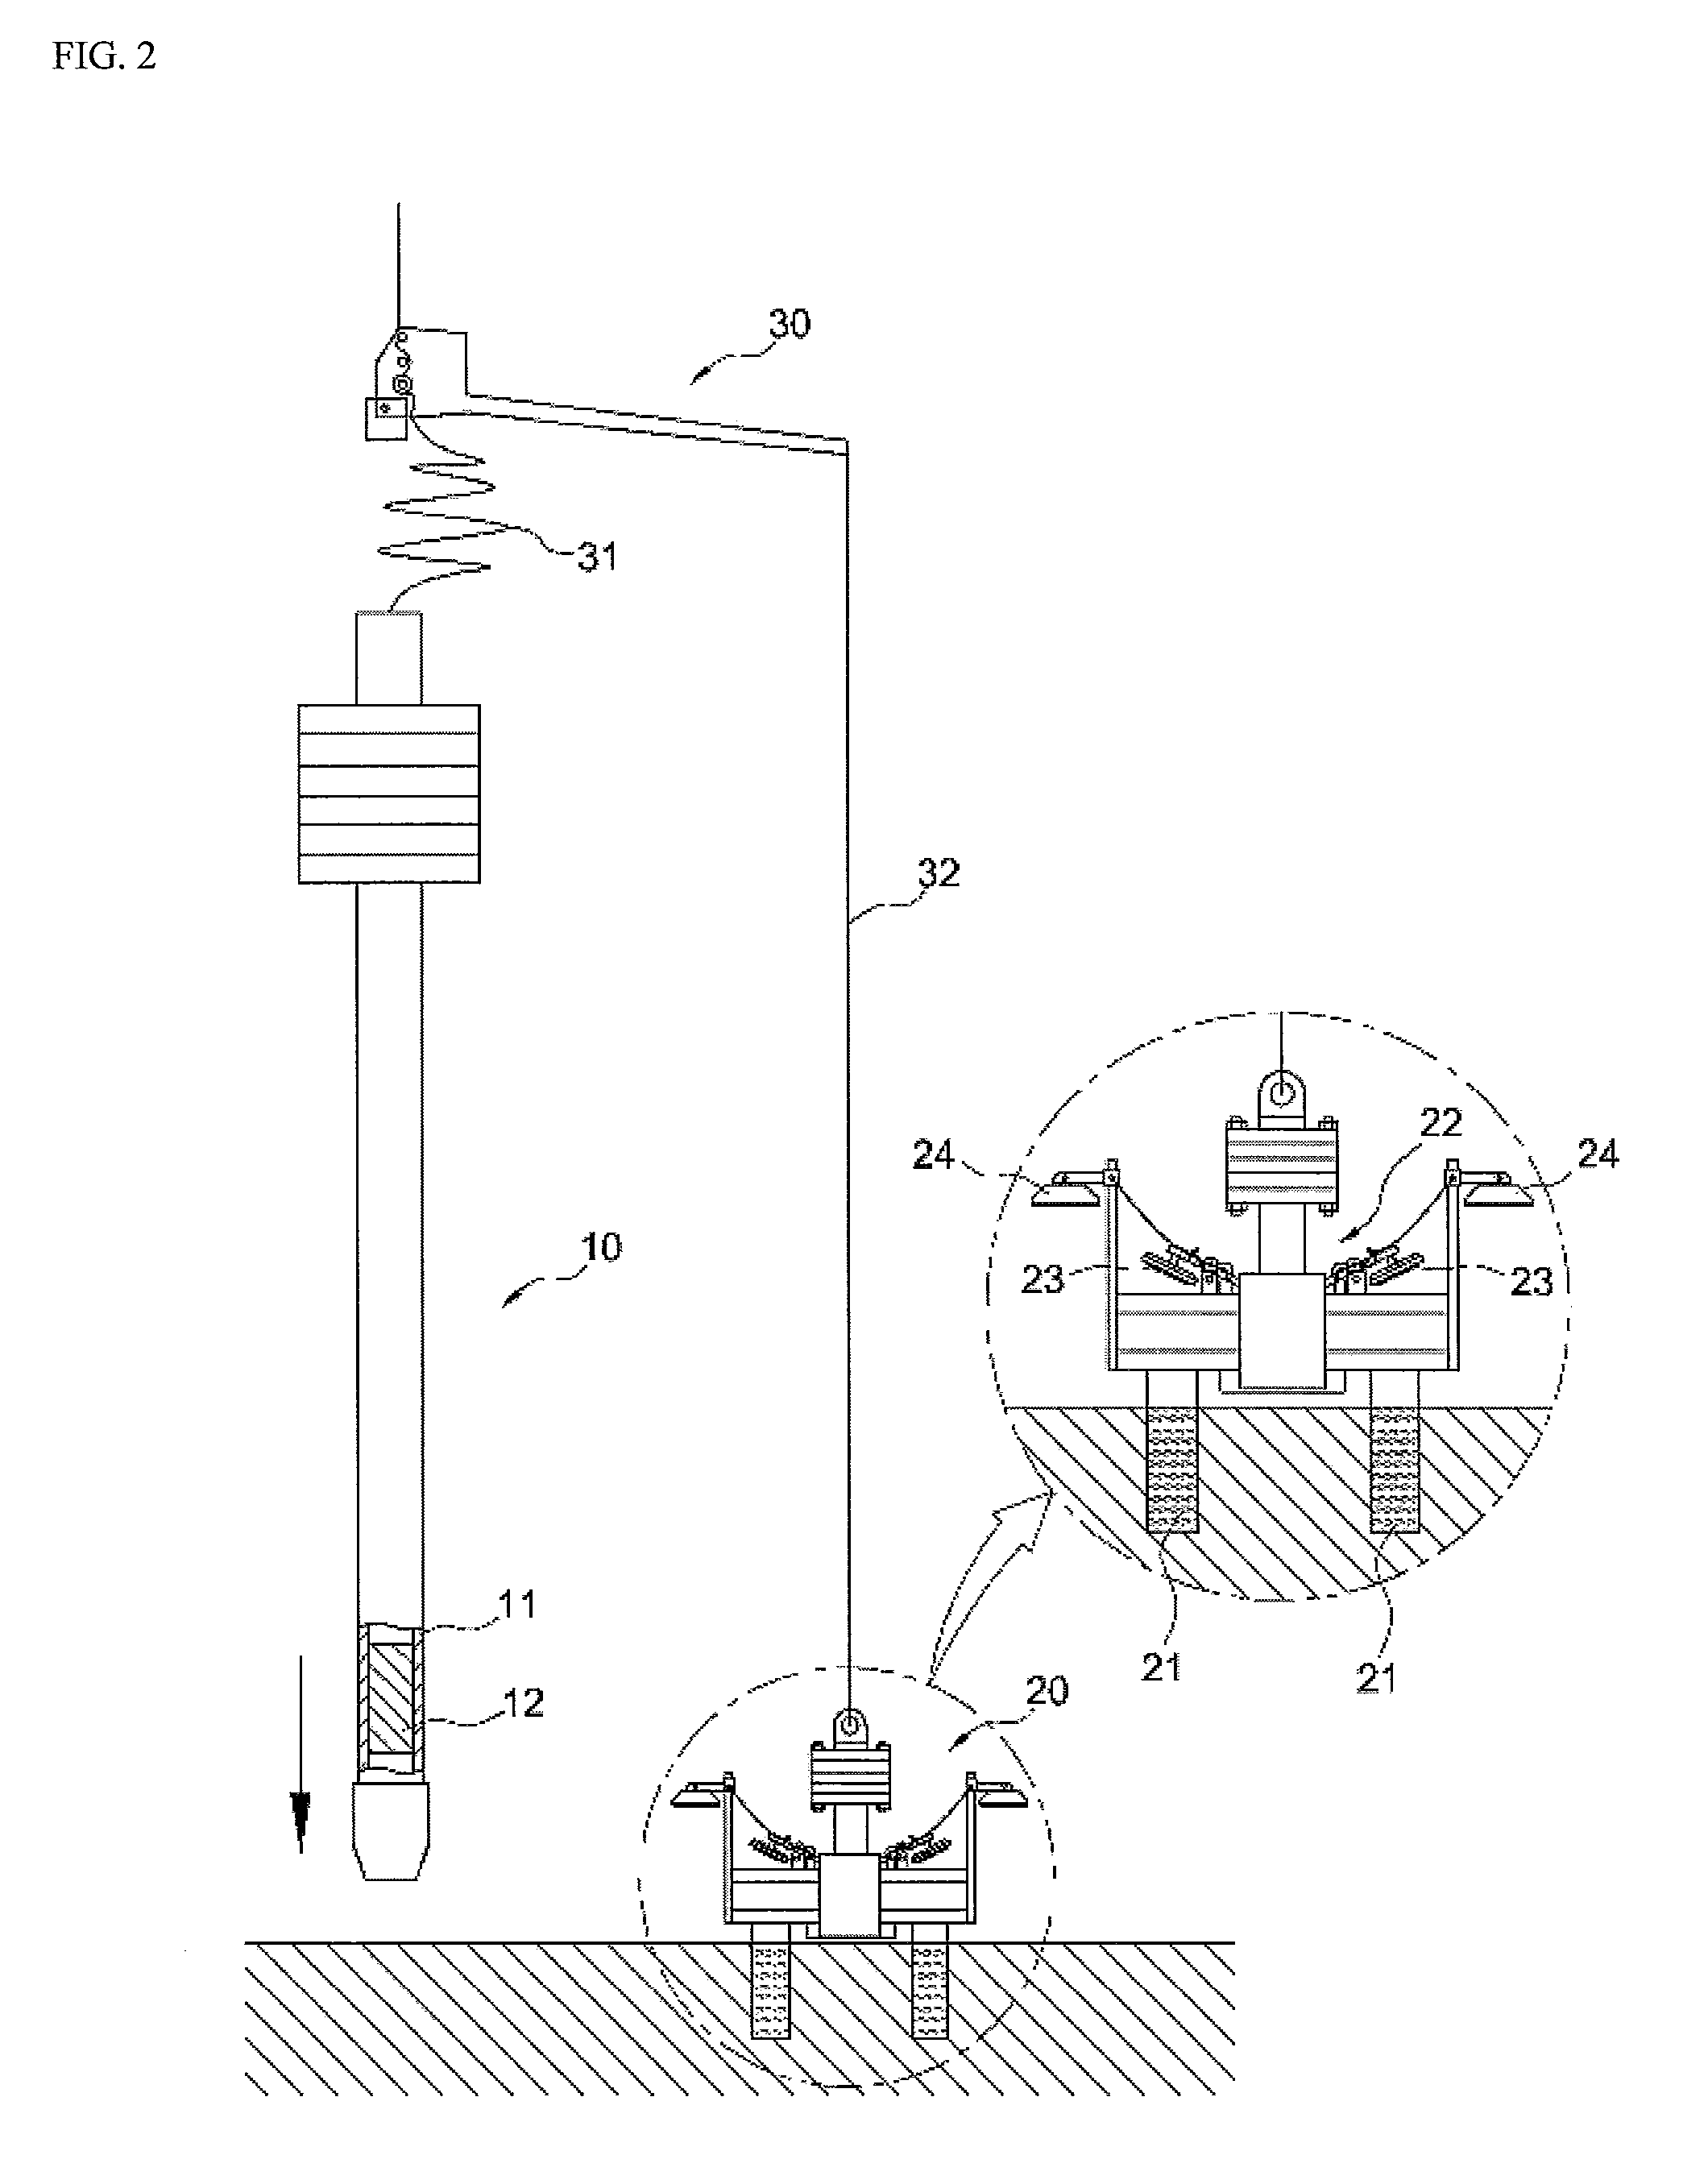 Apparatus for collecting marine deposits